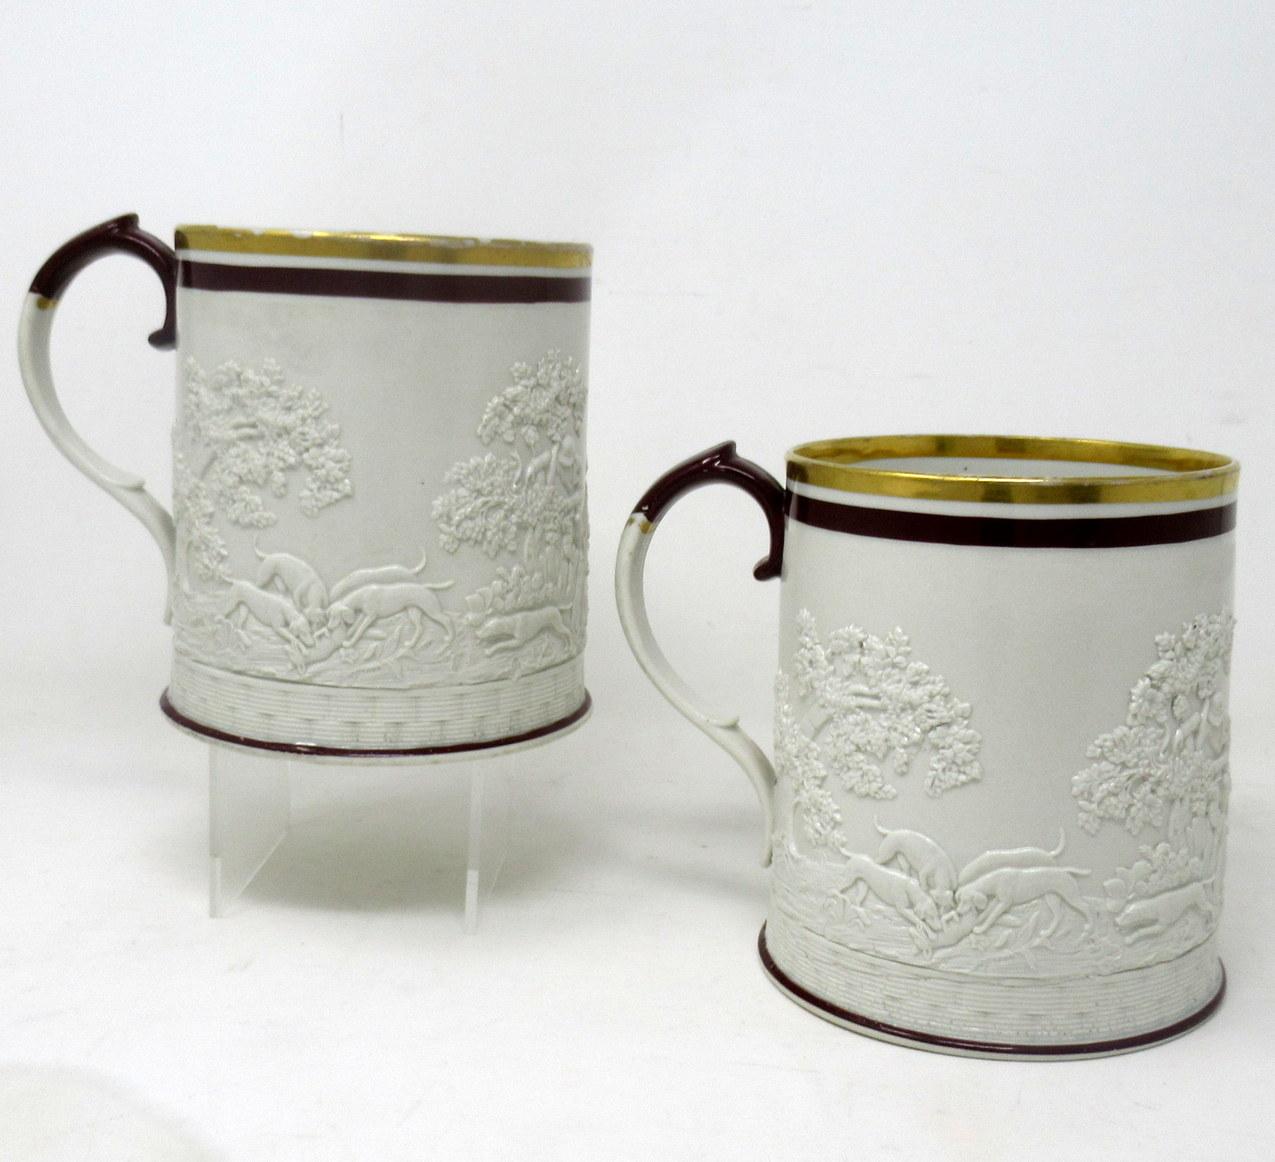 Rare identical Pair of early George III Davenport English feldspathic glazed stoneware pair of Tankards of generous proportions. Circa 1800-1810. 

Each light gilt rimmed cream coloured body is decorated with engine turning at base, the main central